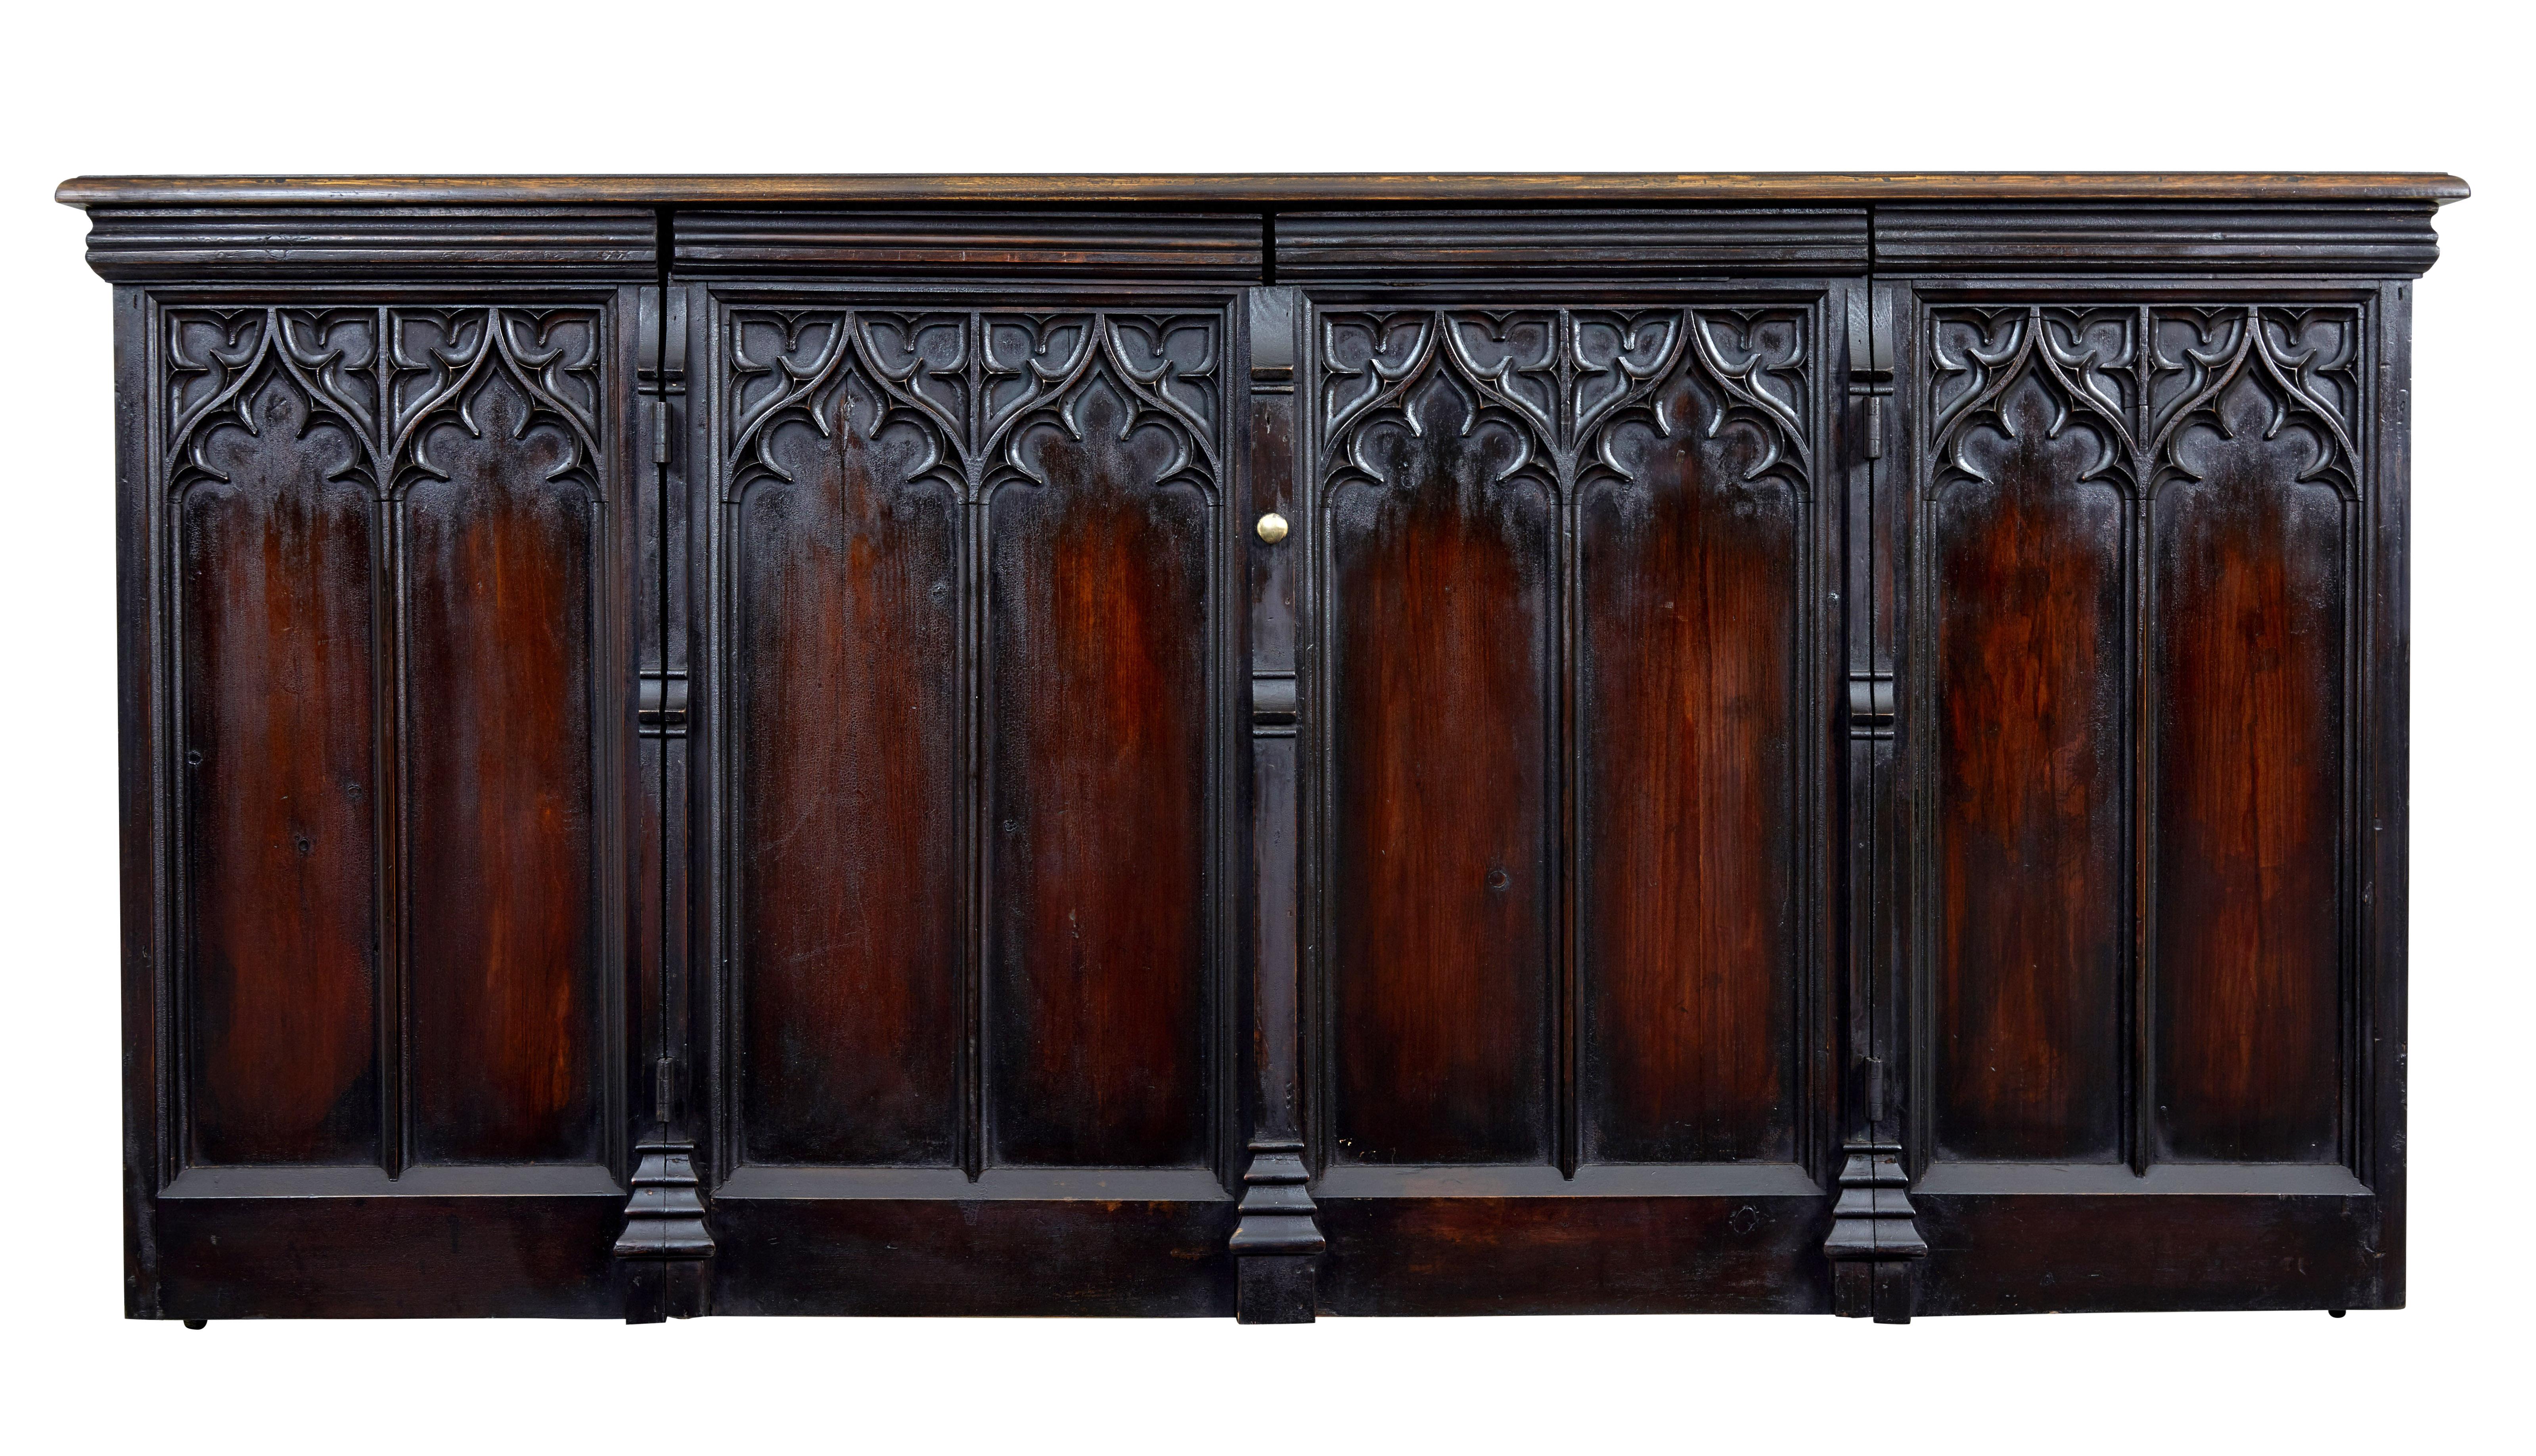 We are pleased to present this unusual piece made from reclaimed church pews.

Using the tracery and elements from church pews has allowed the maker to turn this into a sideboard. 4 panels to the front with the middle 2 opening to reveal a single